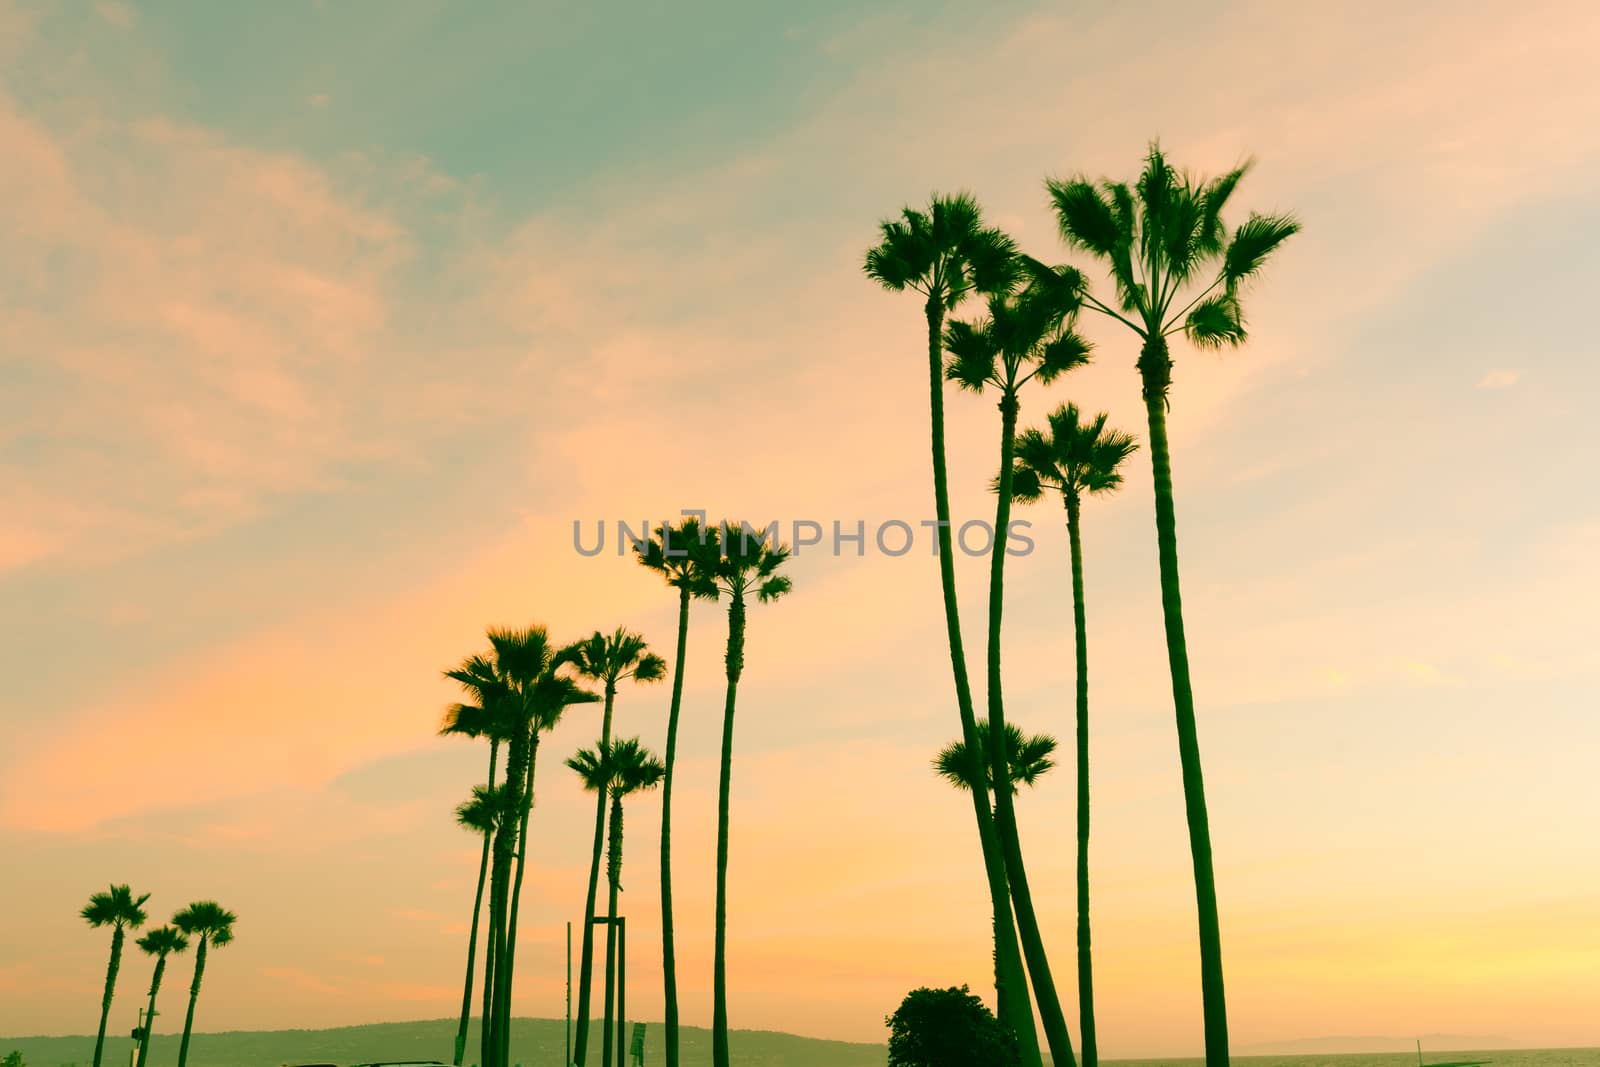 Retro Californian nights colorful sky and silhouette palms at sunset by brians101